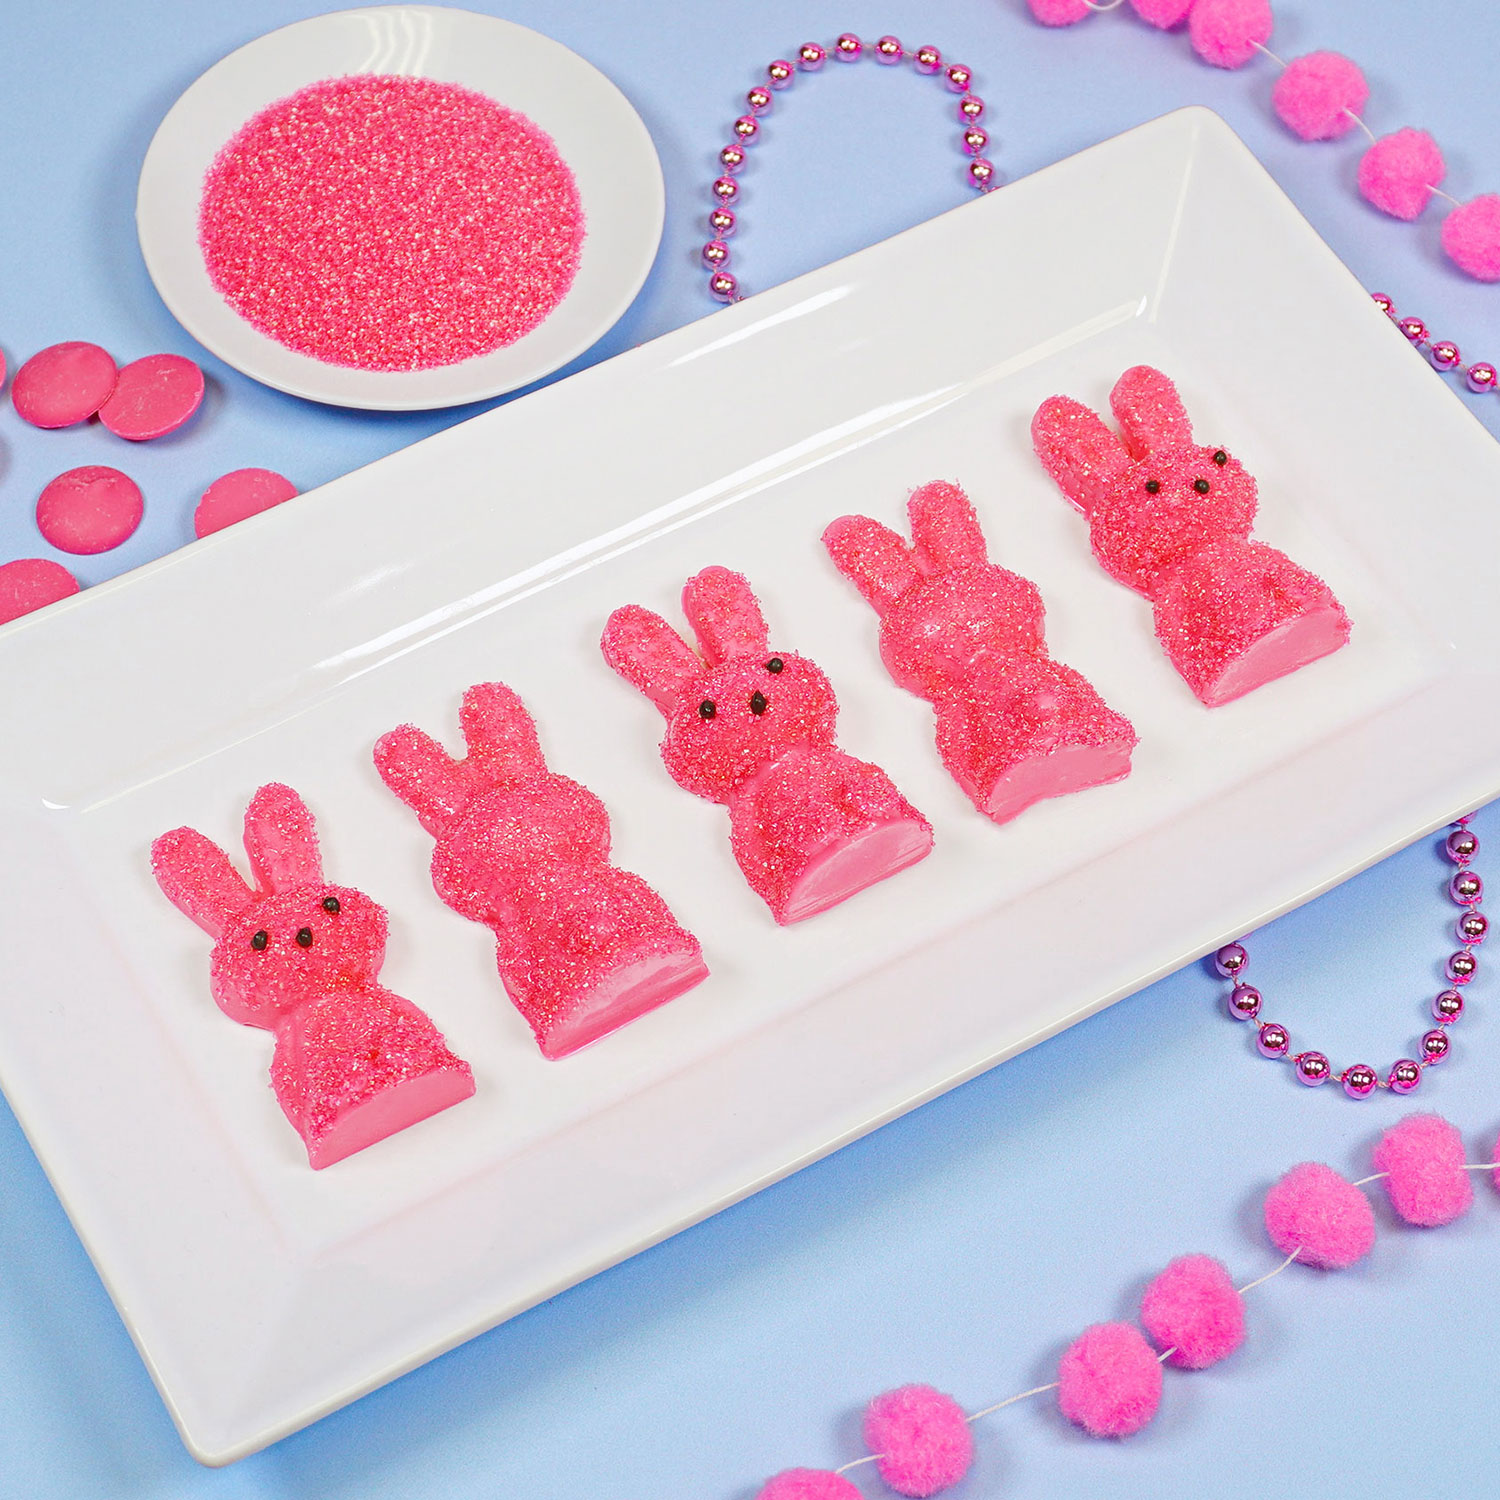 pink chocolate bunnies covered in pink sanding sugar